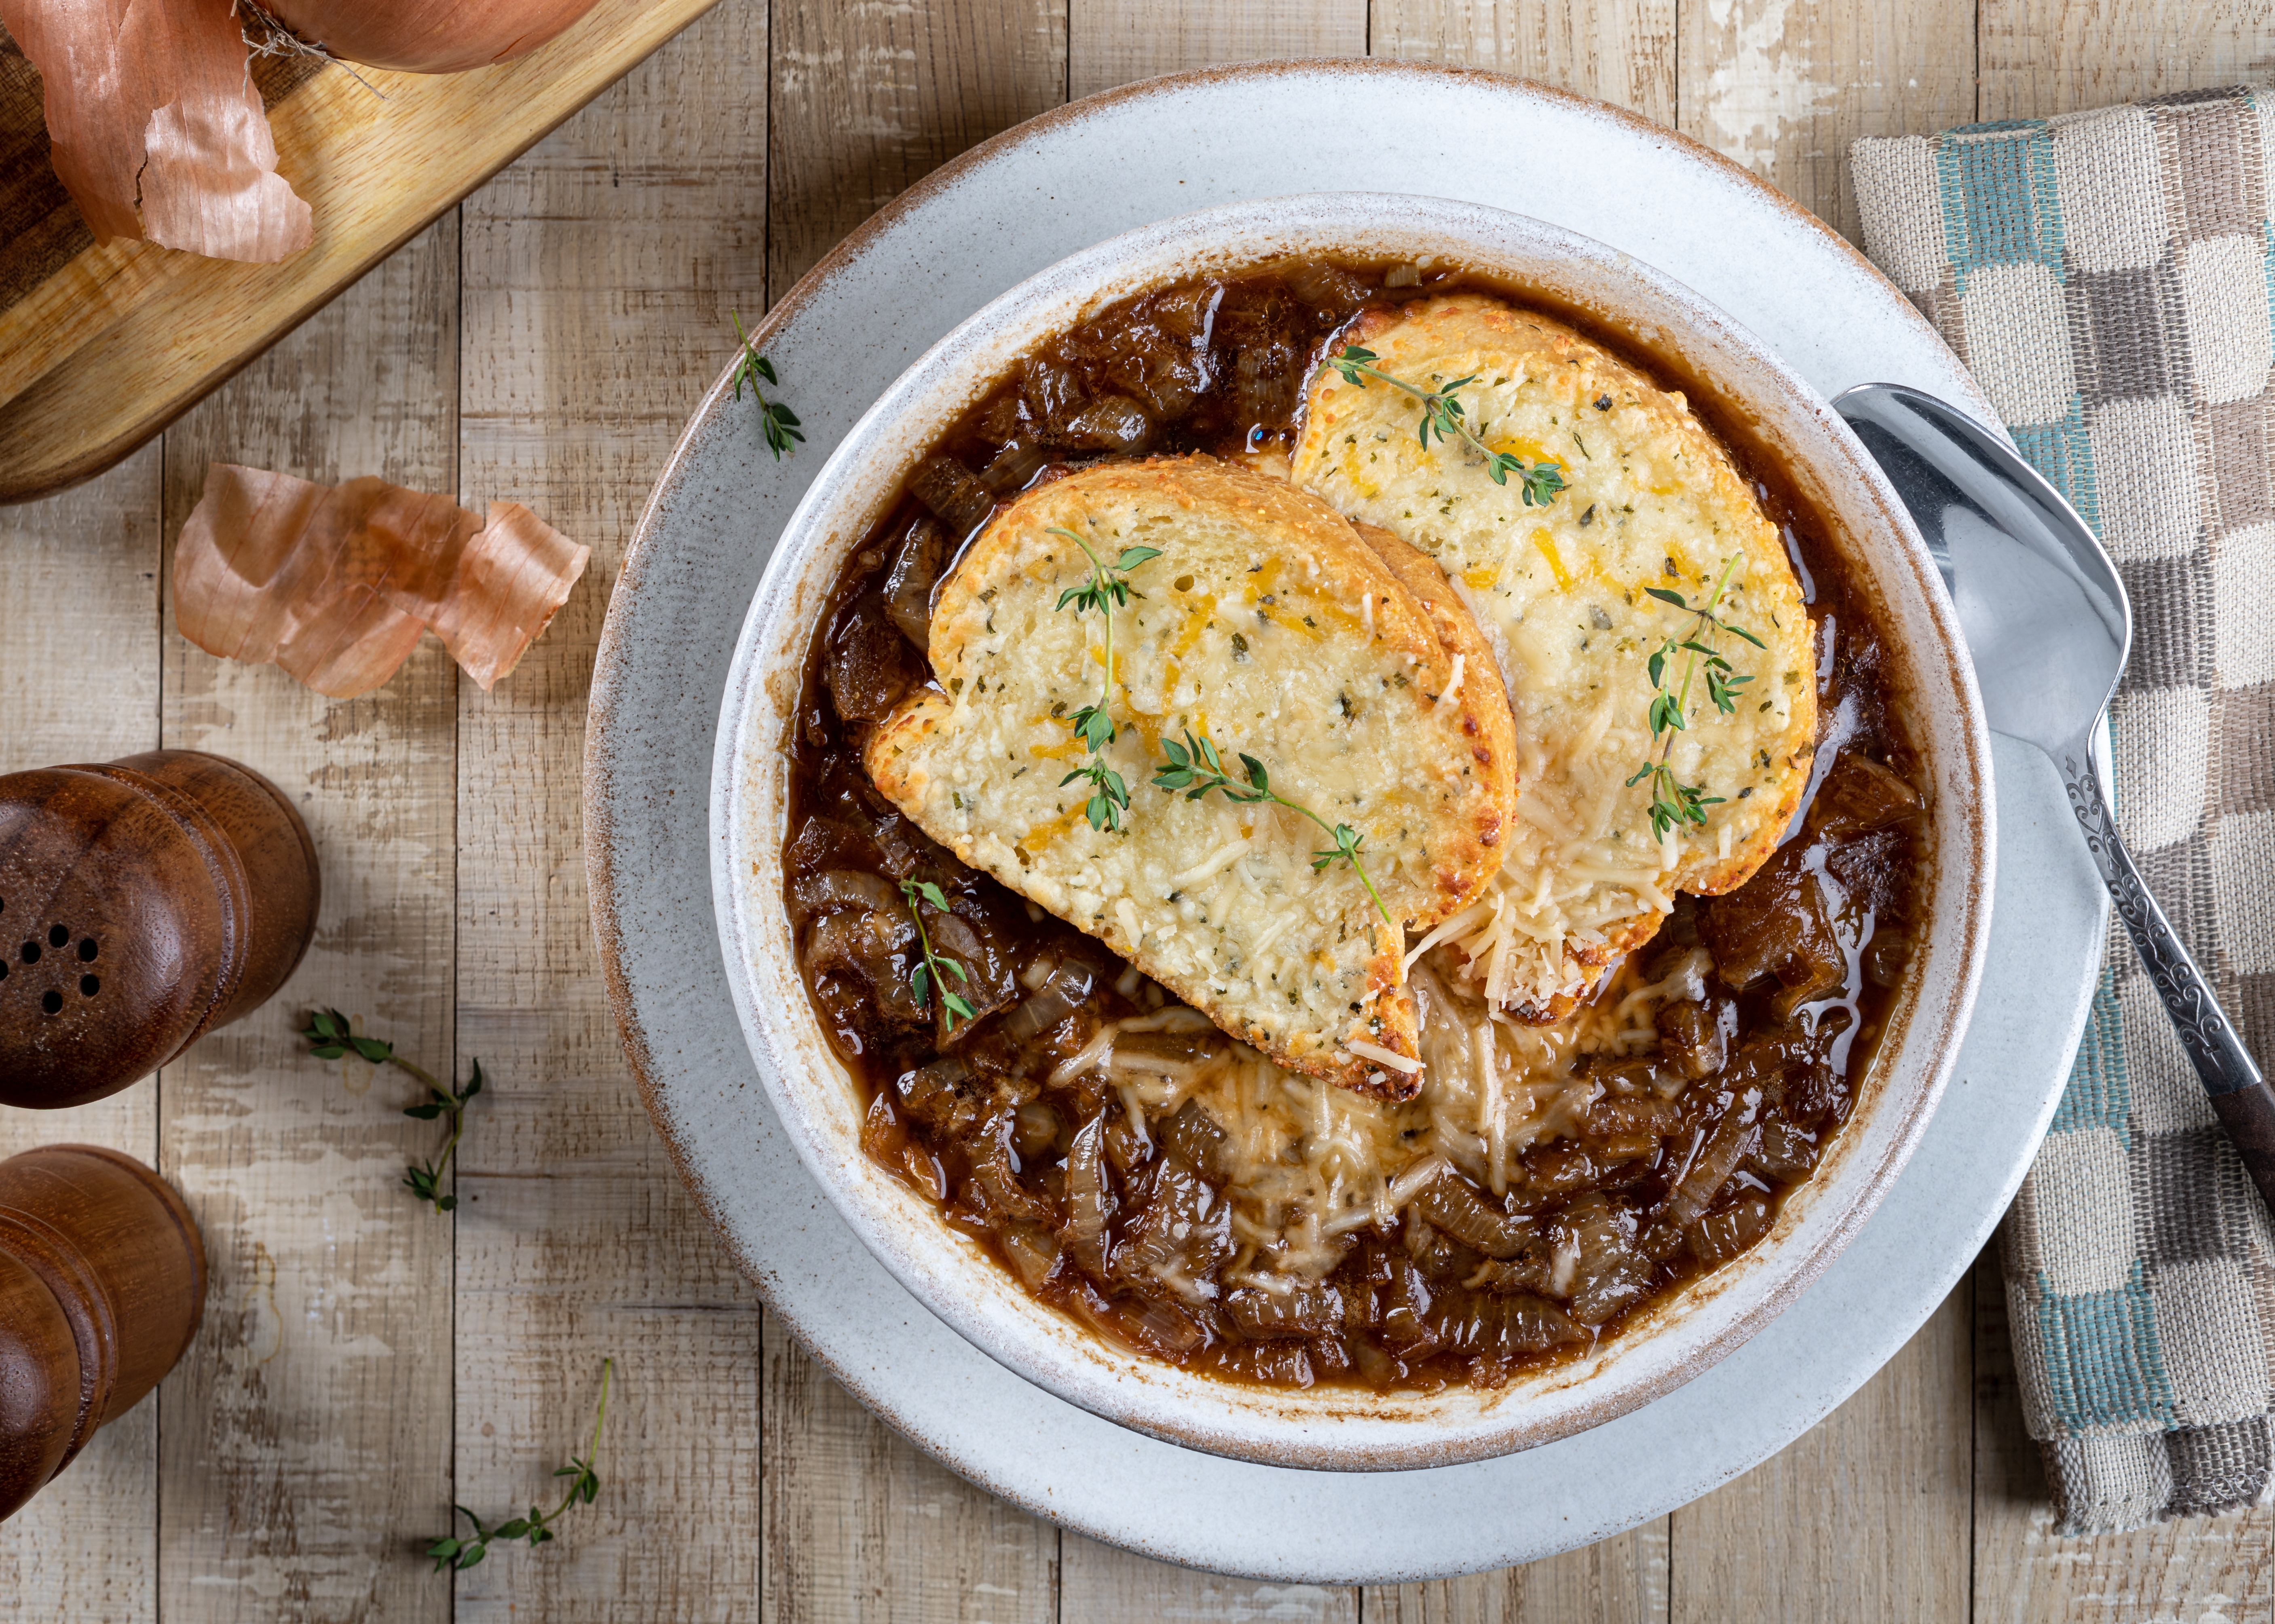 French onion soup with toasted cheese baguette garnished with thyme on a rustic wooden table. | Source: Shutterstock